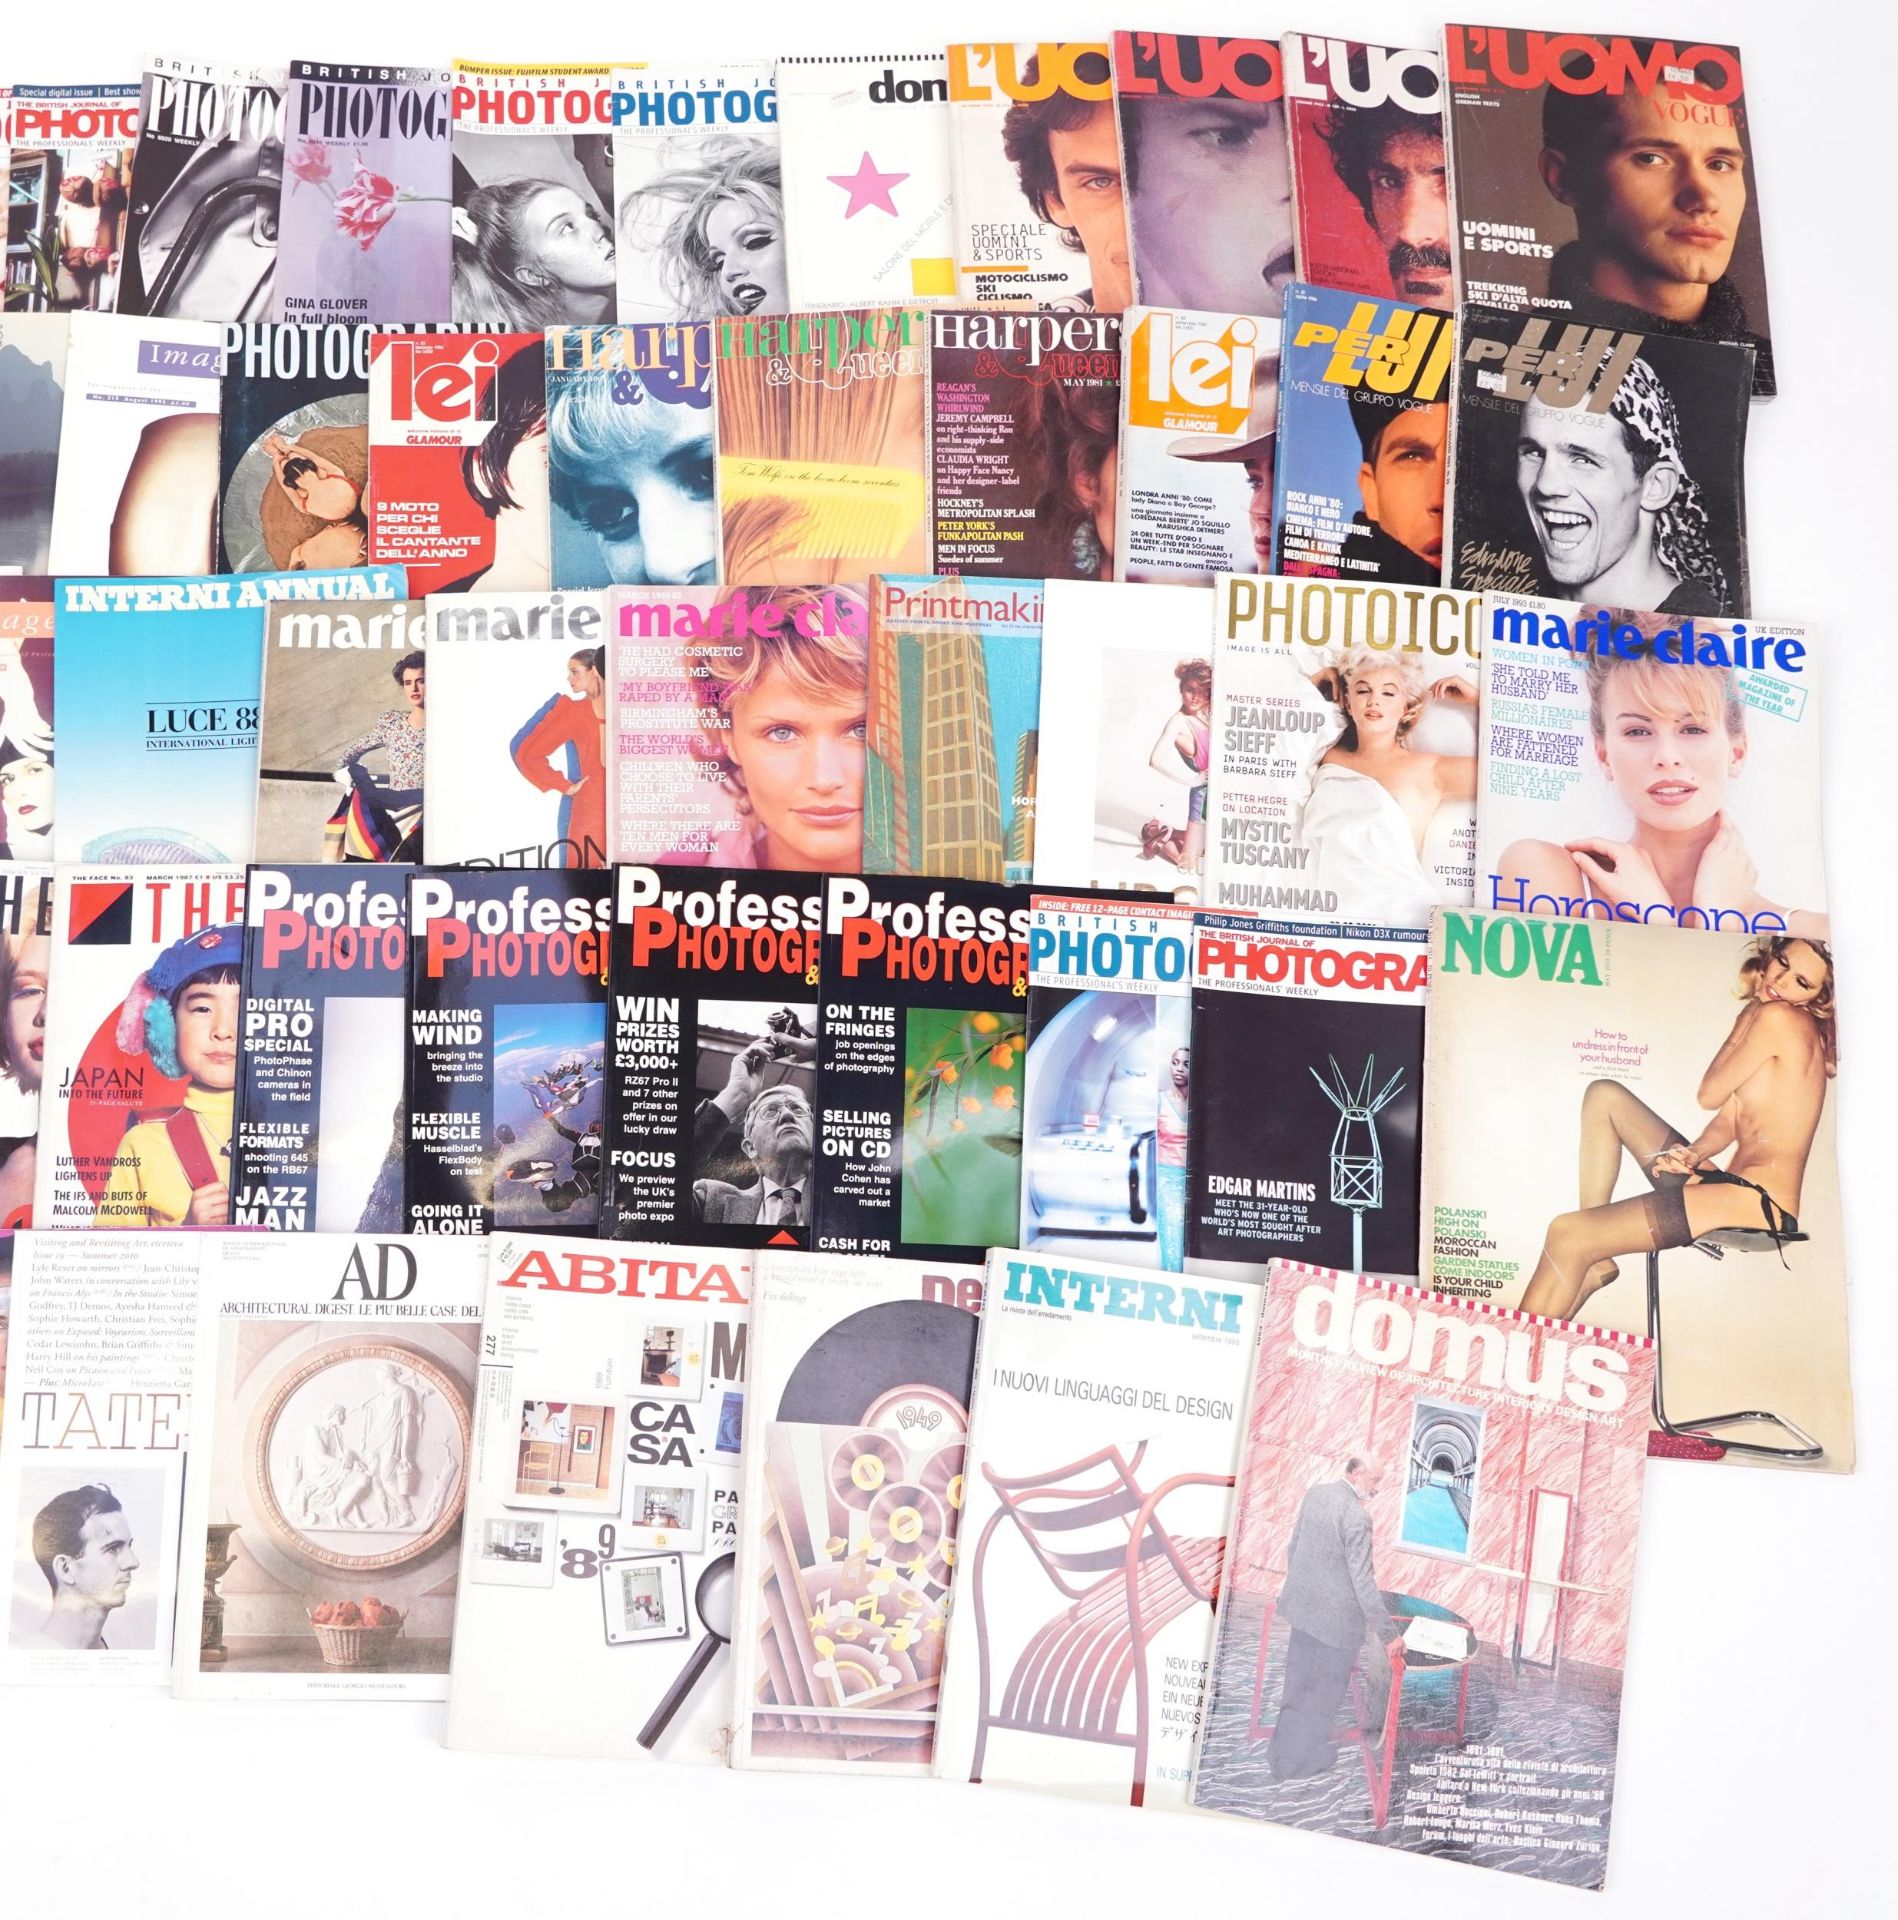 Large collection of vintage and later art photography magazines including Photo-Art, Professional - Image 3 of 3